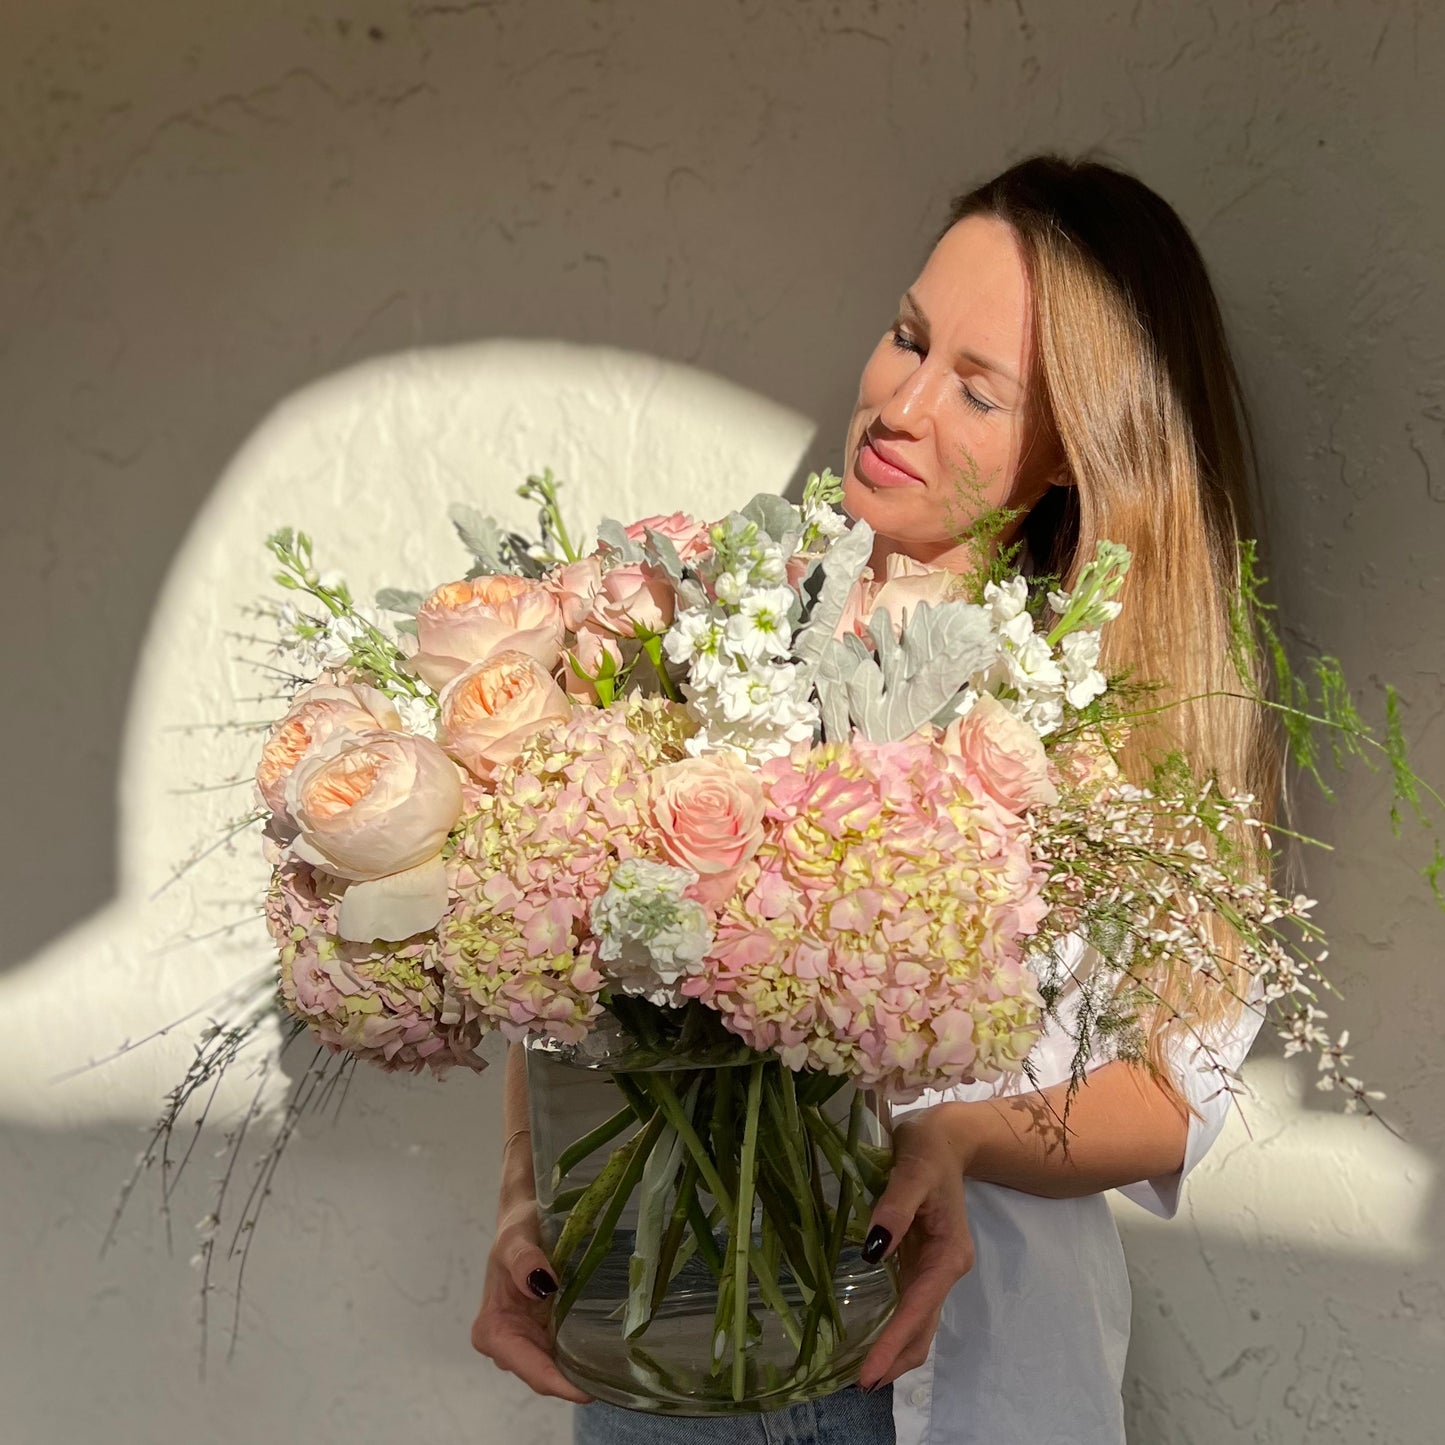 A beautiful woman holding stunning light color bouquet